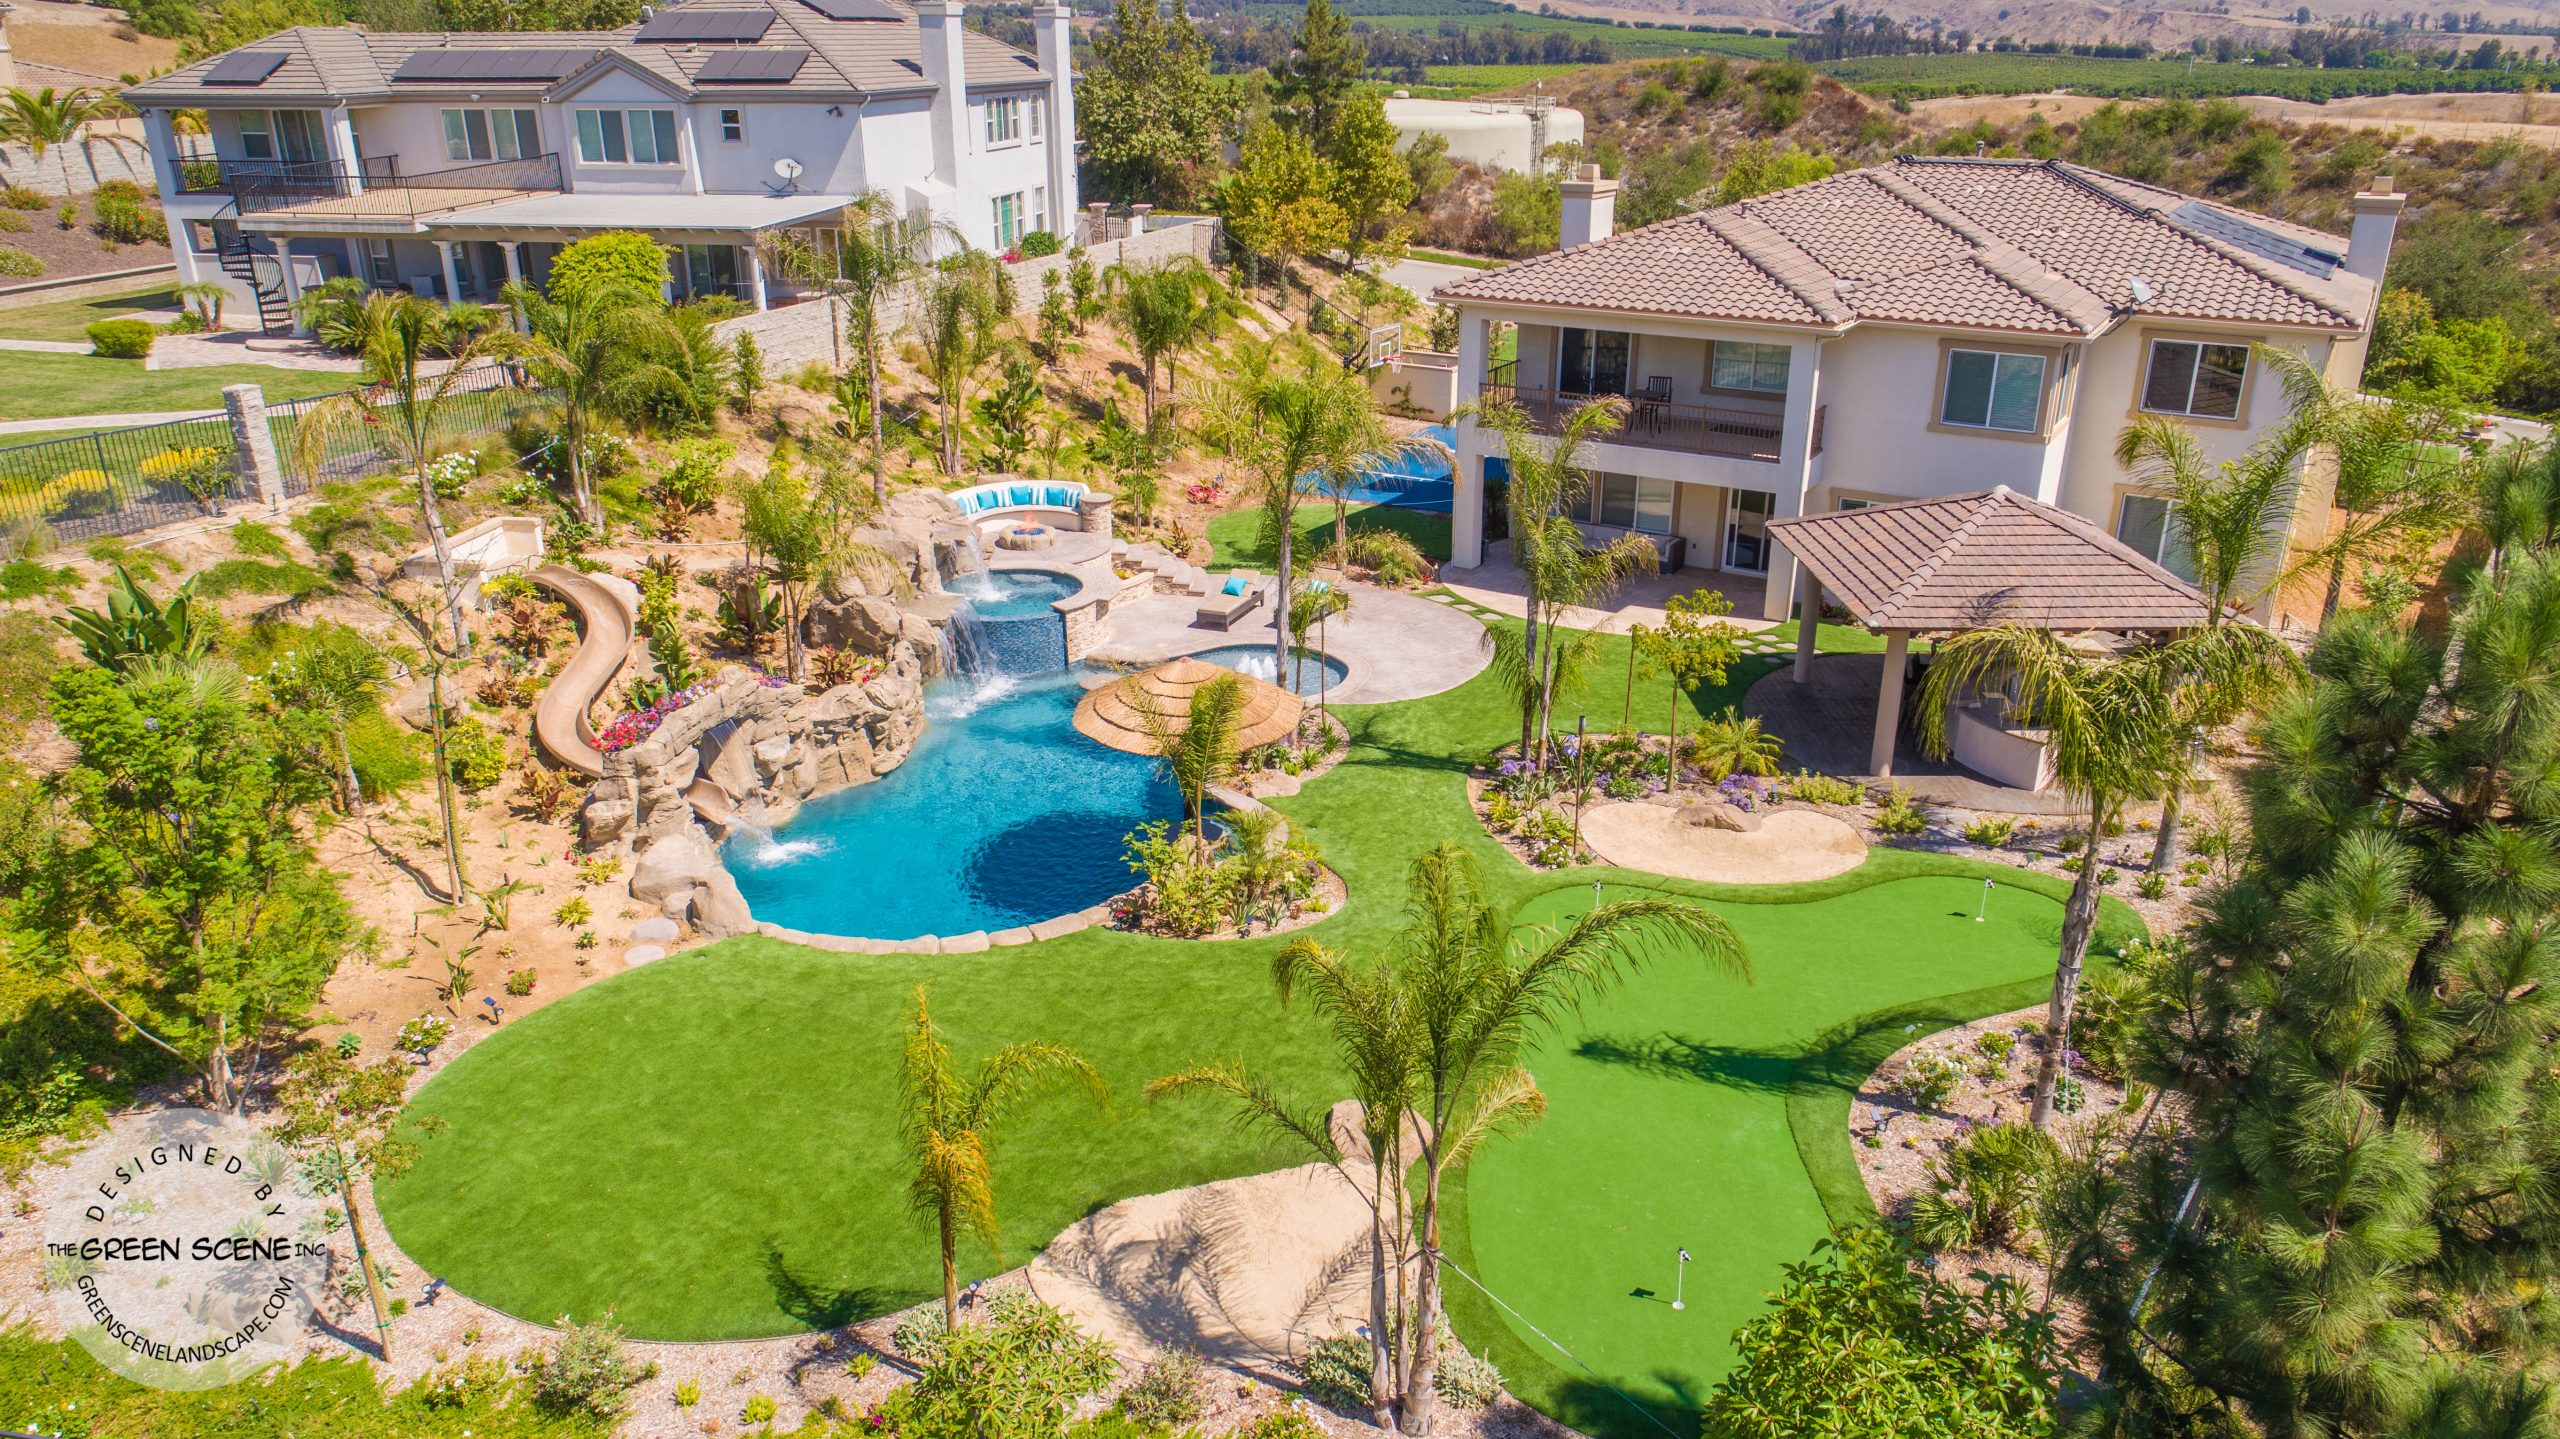 backyard private water park with pool, golf course, slide and outdoor kitchen